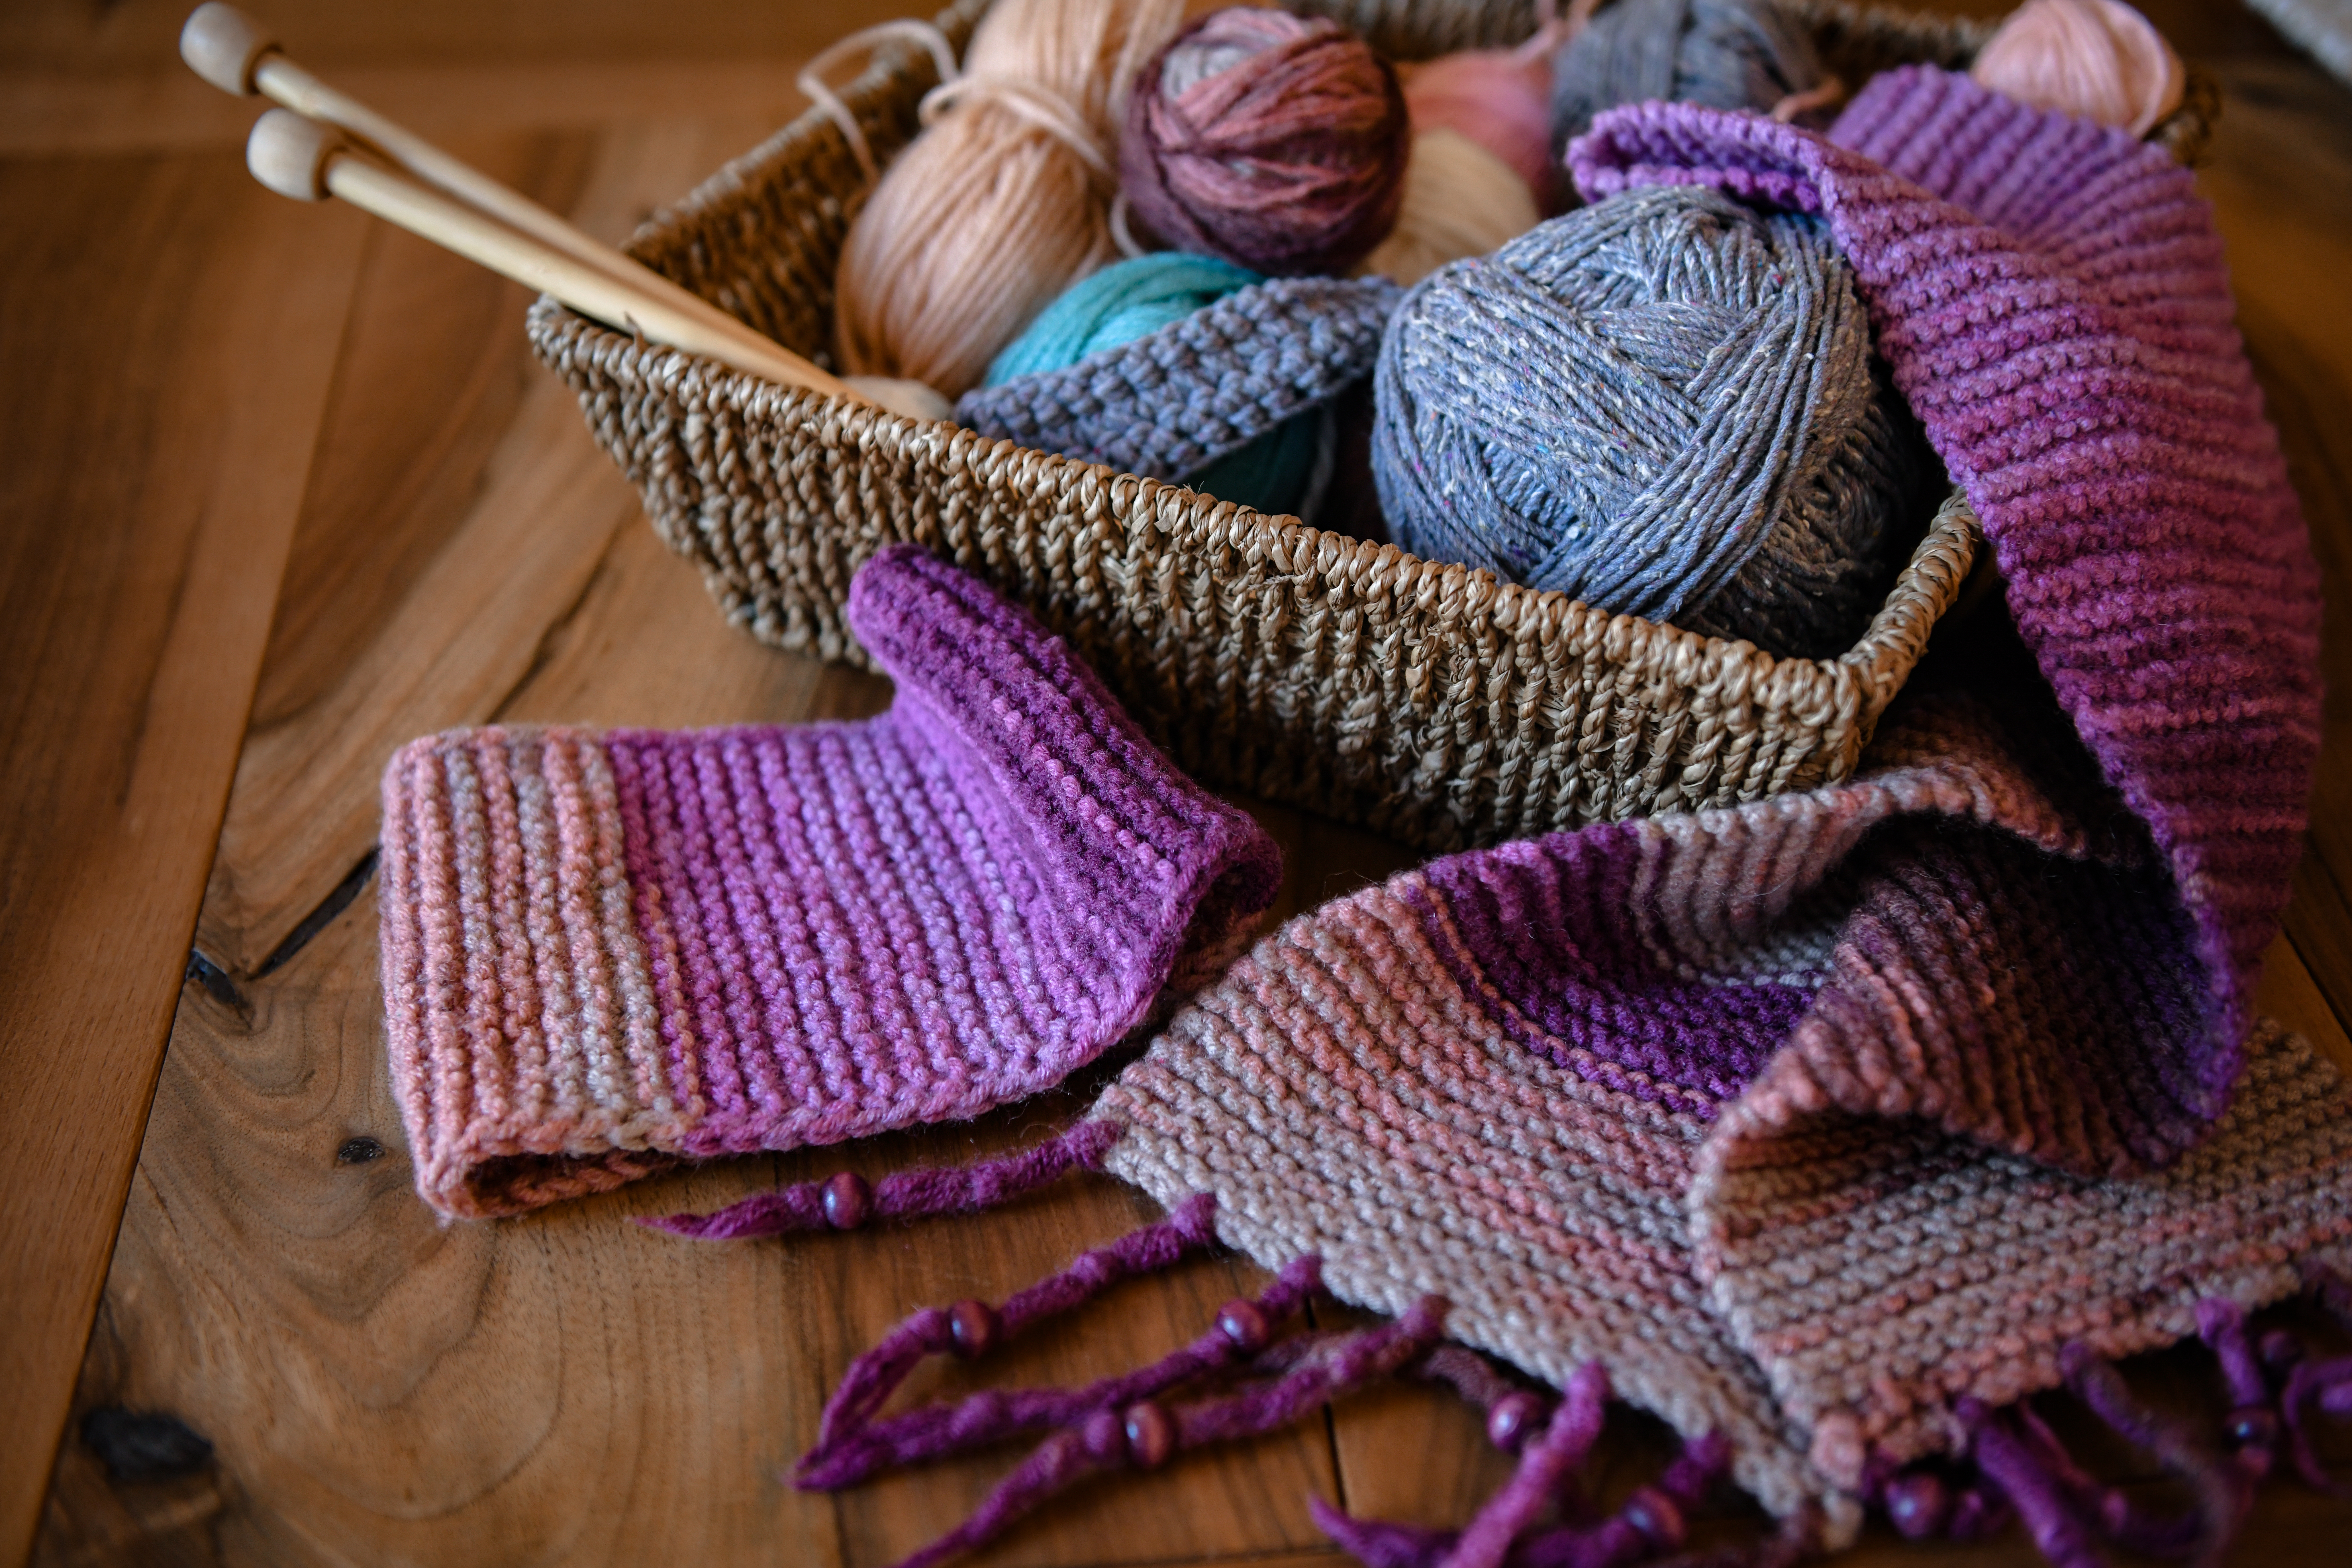 Knitting materials in a basket.